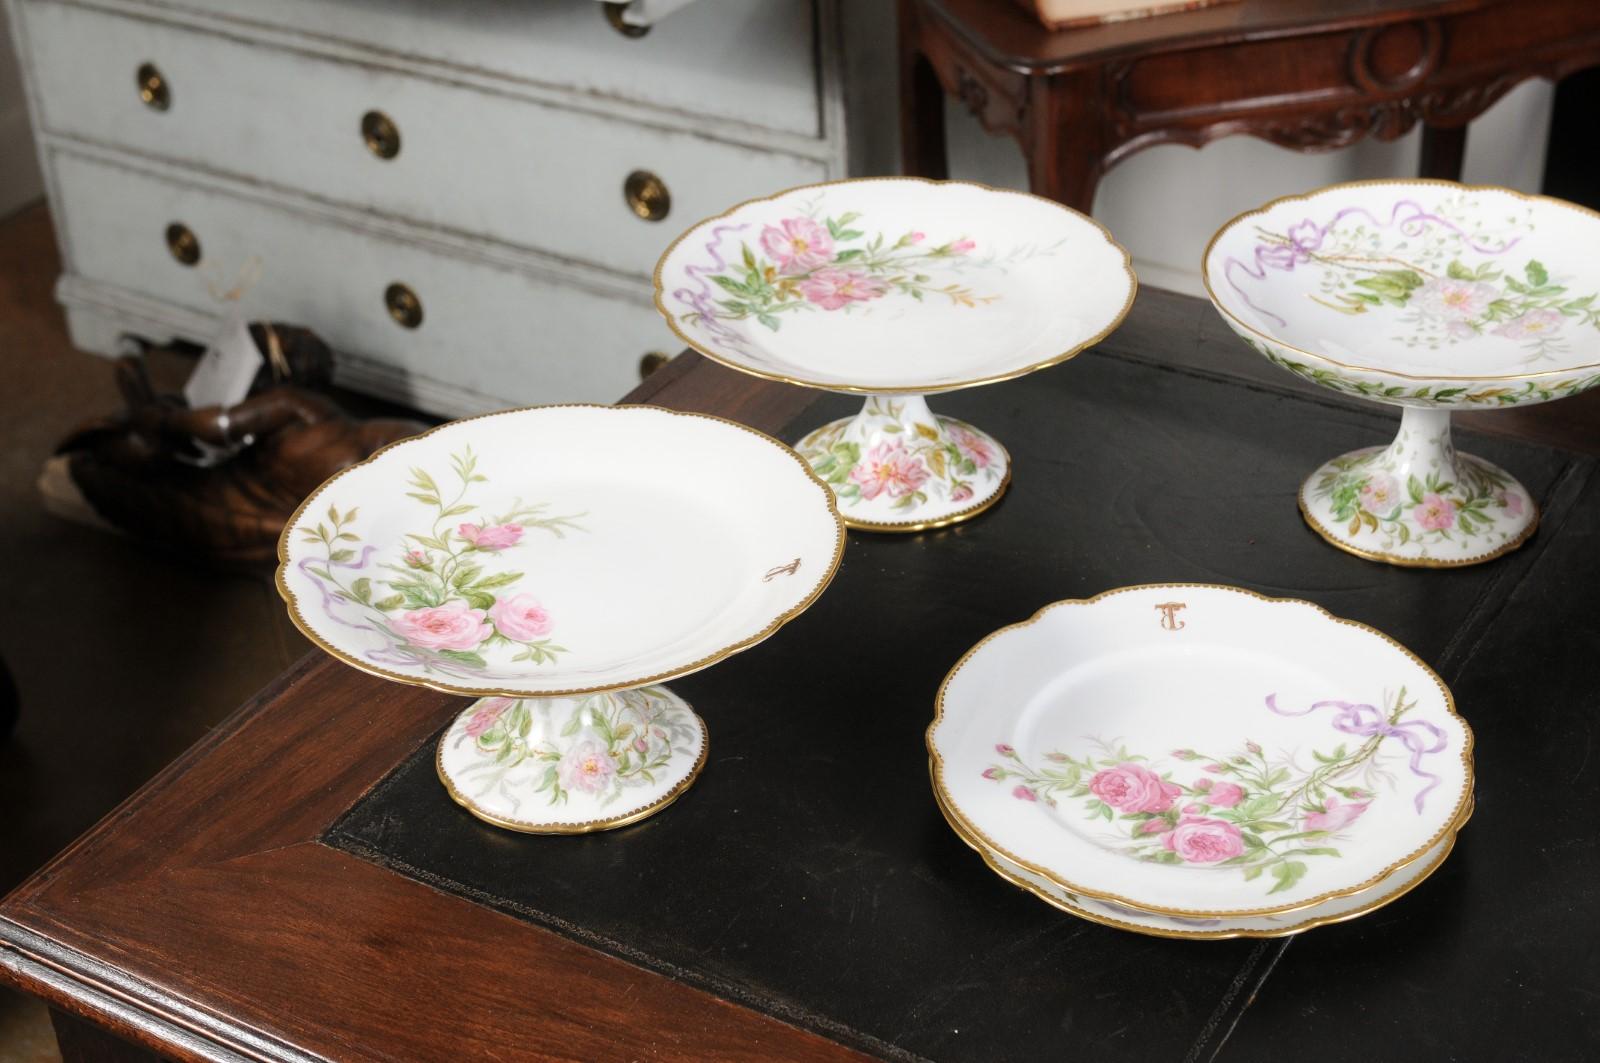 20th Century English Porcelain Compotes and Plates with Floral Décor and Gilt Trim For Sale